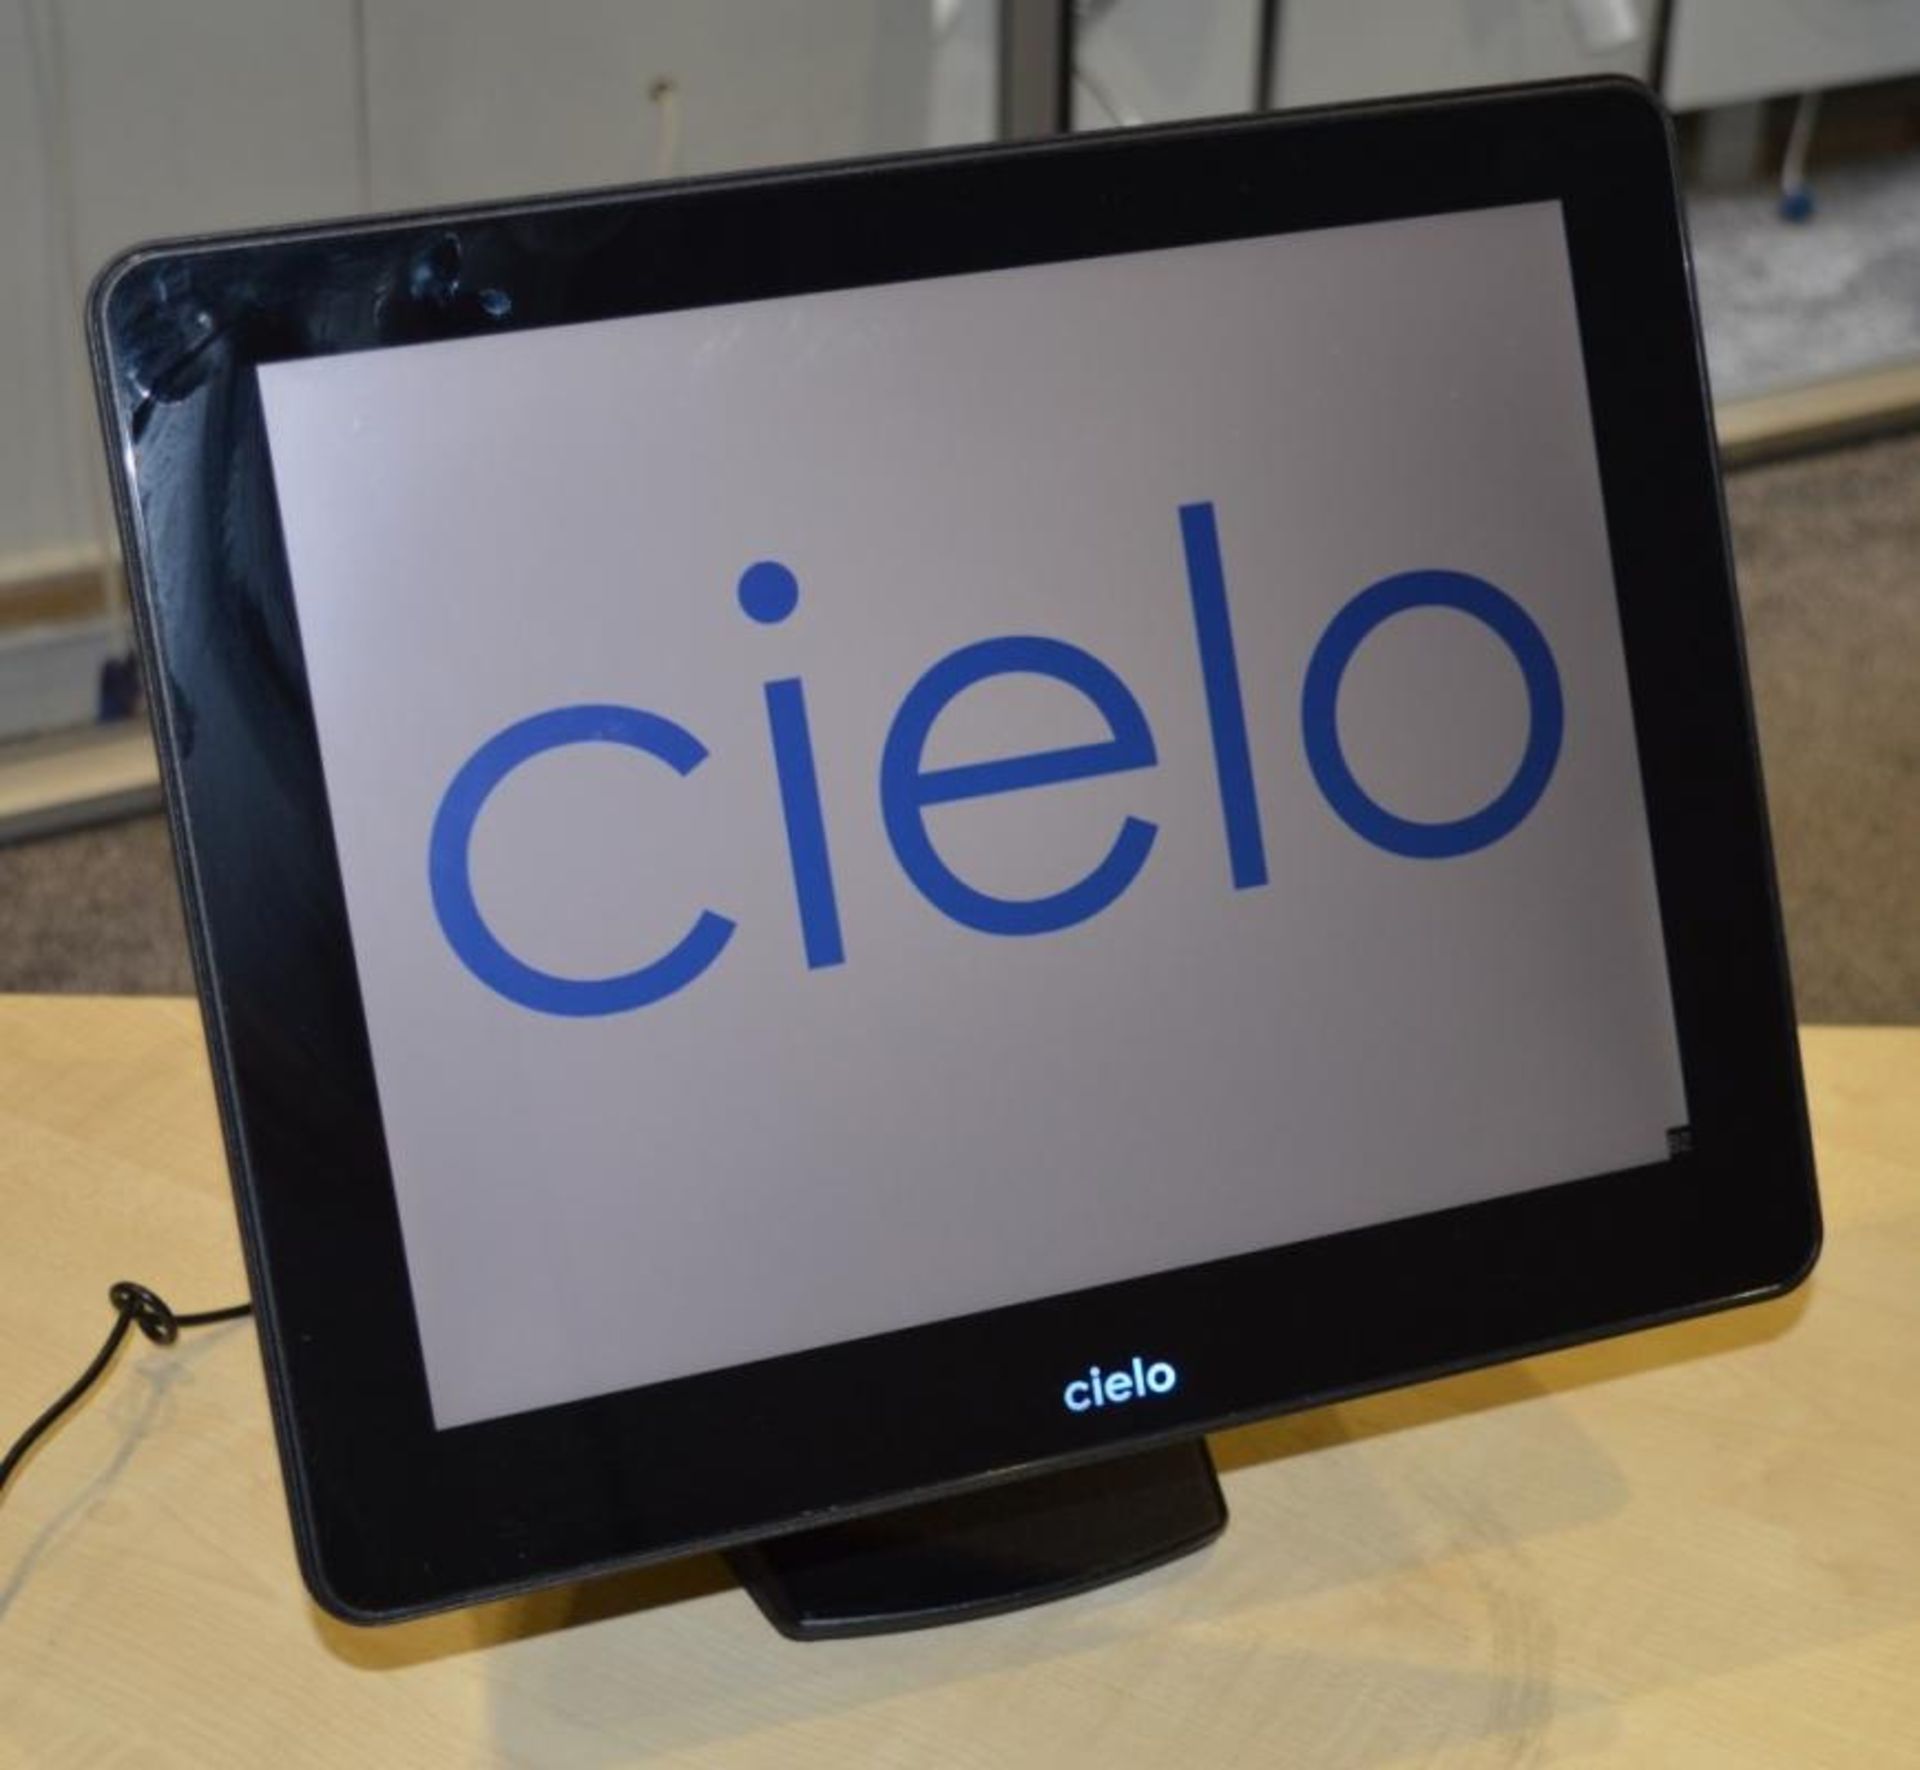 1 x Cielo AP-3615 All in One Desktop Computer POS System - Features Include 15 Inch Touch Screen, In